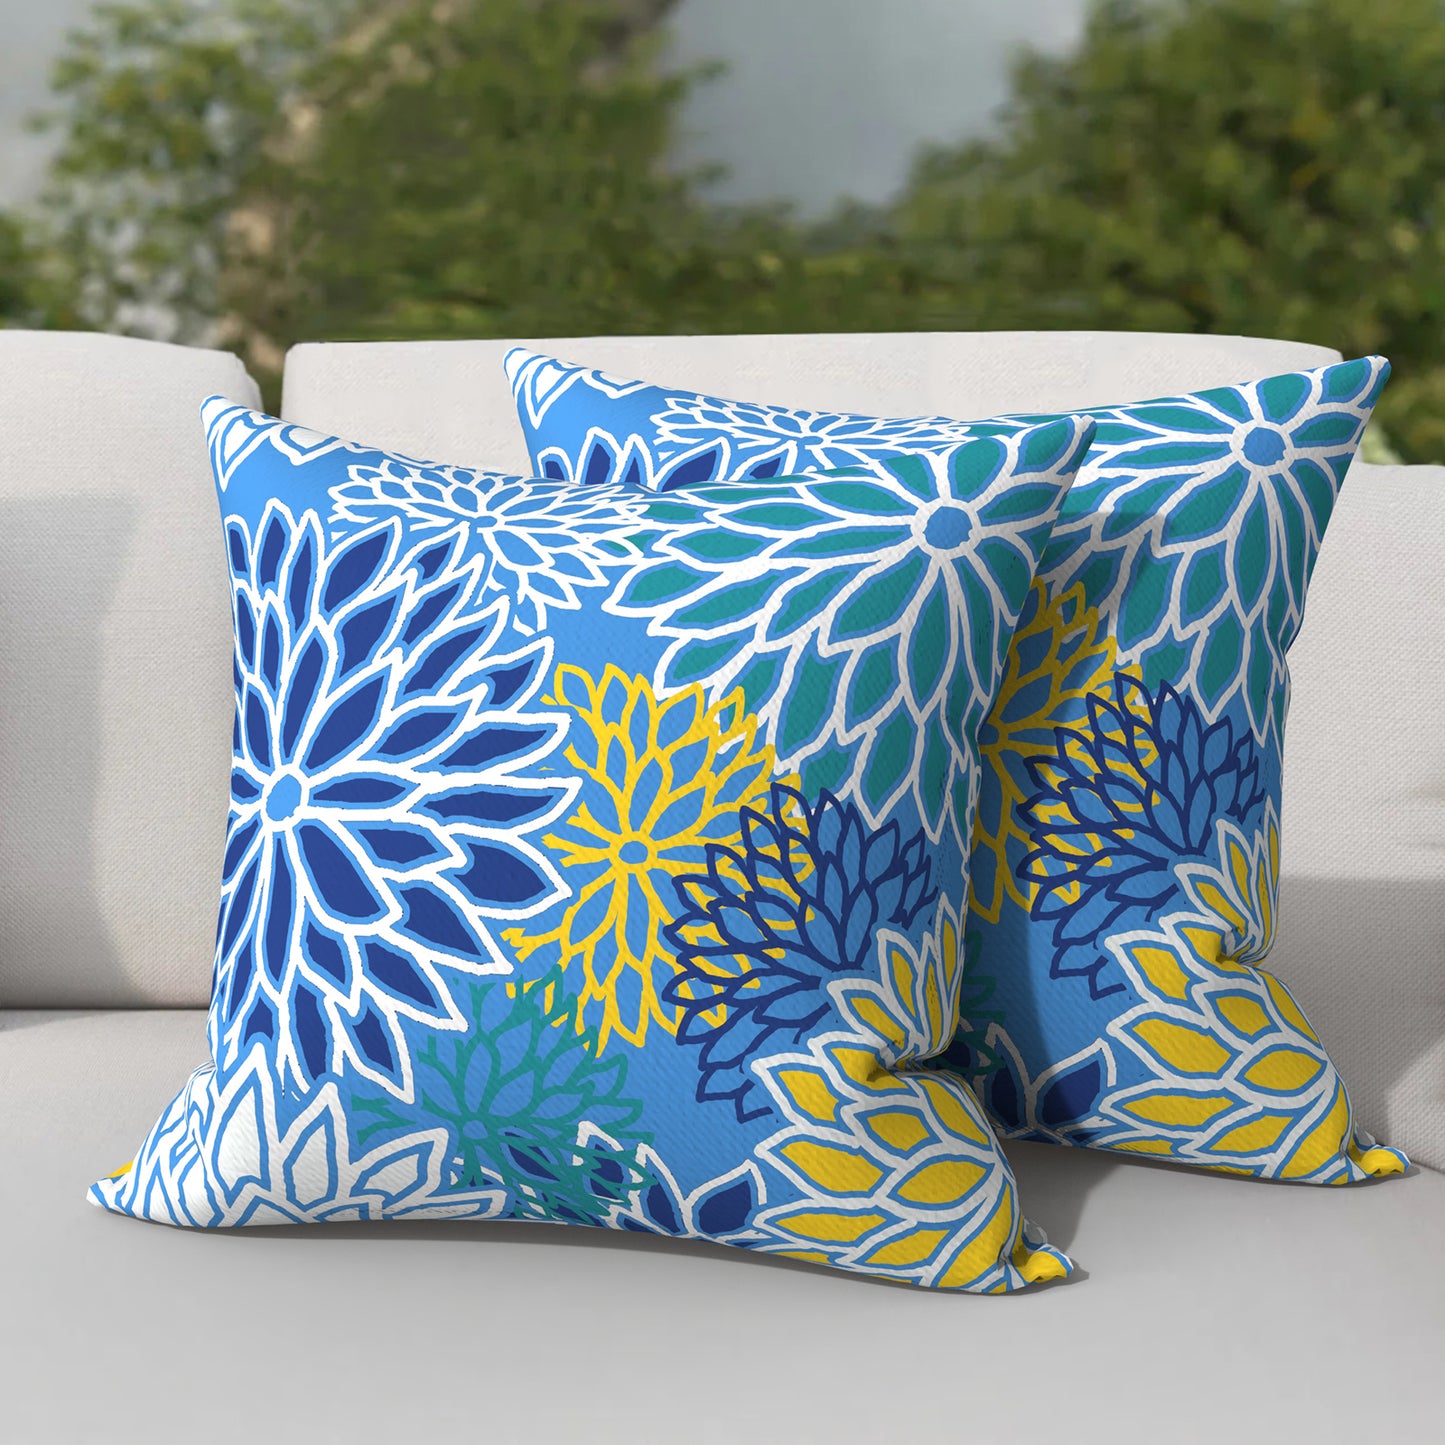 Melody Elephant Patio Throw Pillows with Inners, Fade Resistant Square Pillow Pack of 2, Decorative Garden Cushions for Home, 18x18 Inch, Dahlia Blue